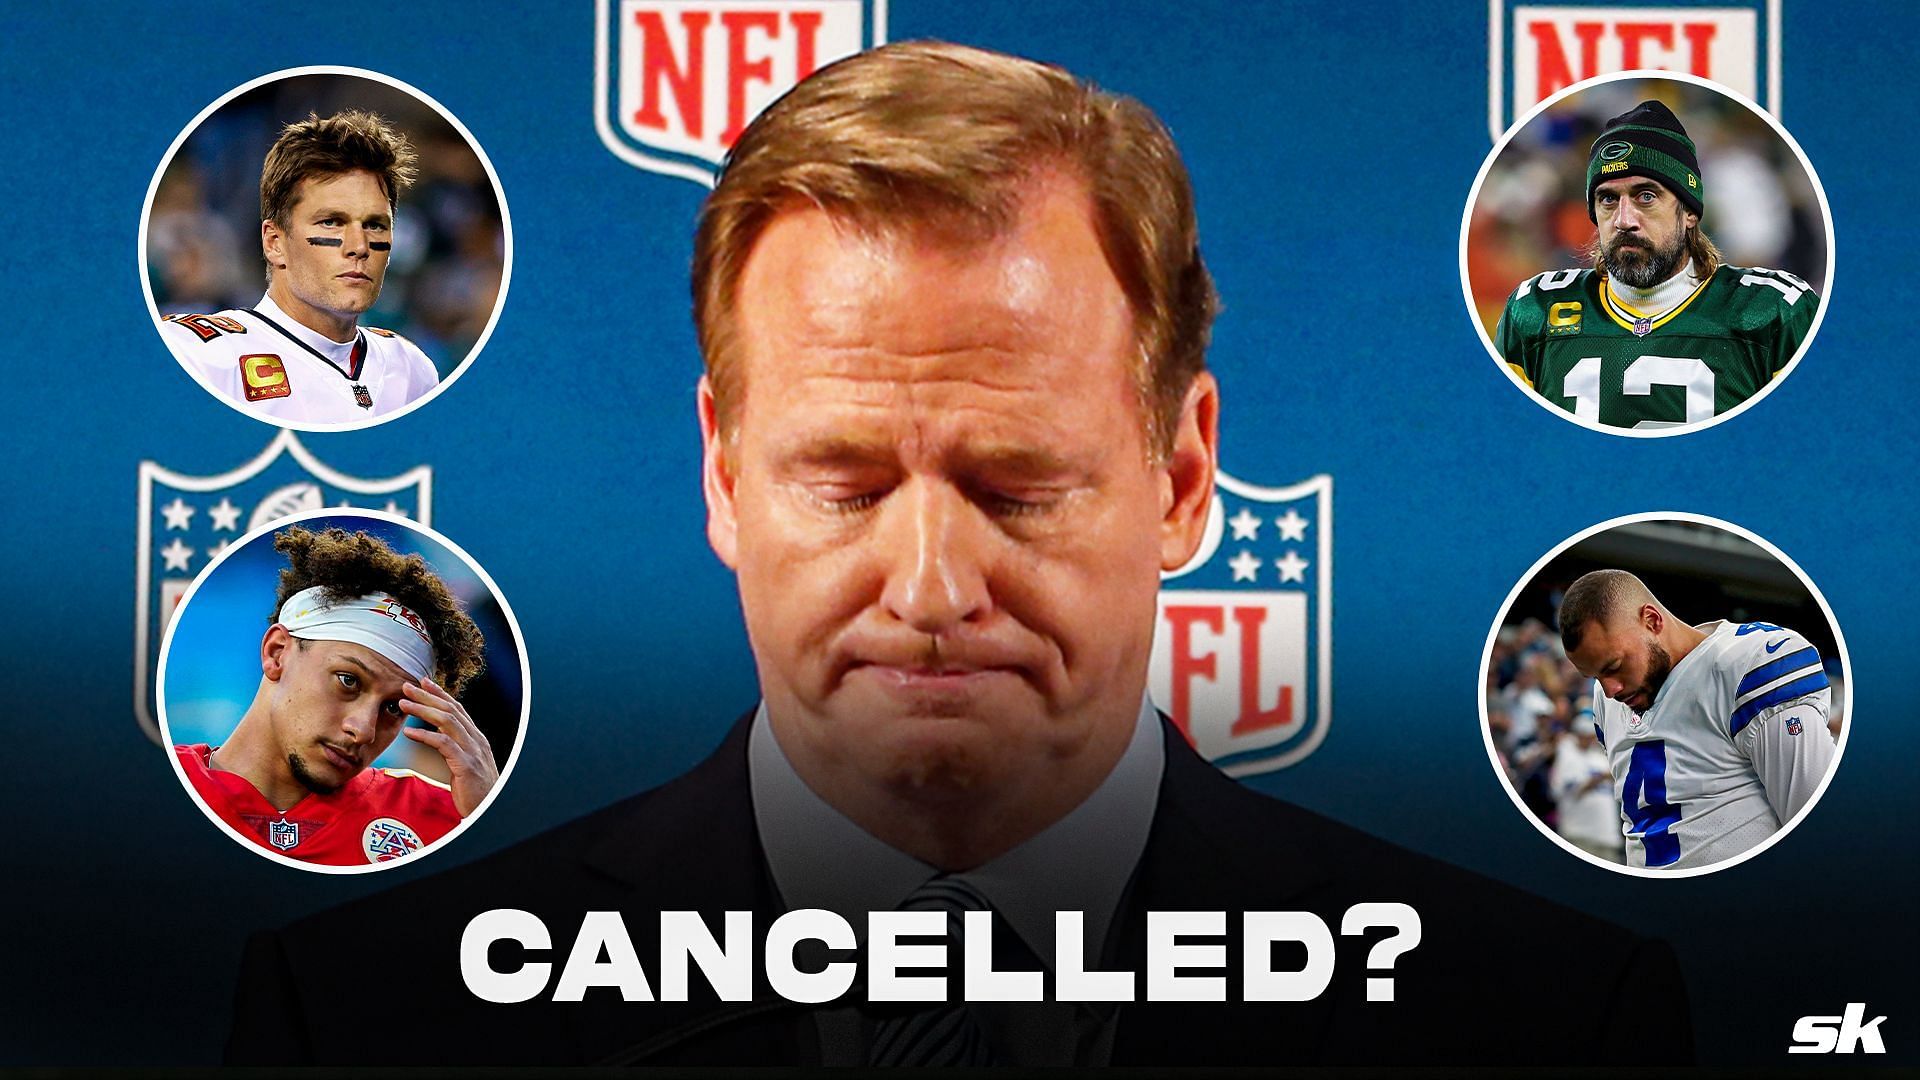 NFL Commissioner Roger Goodell has some serious questions to answer about the season